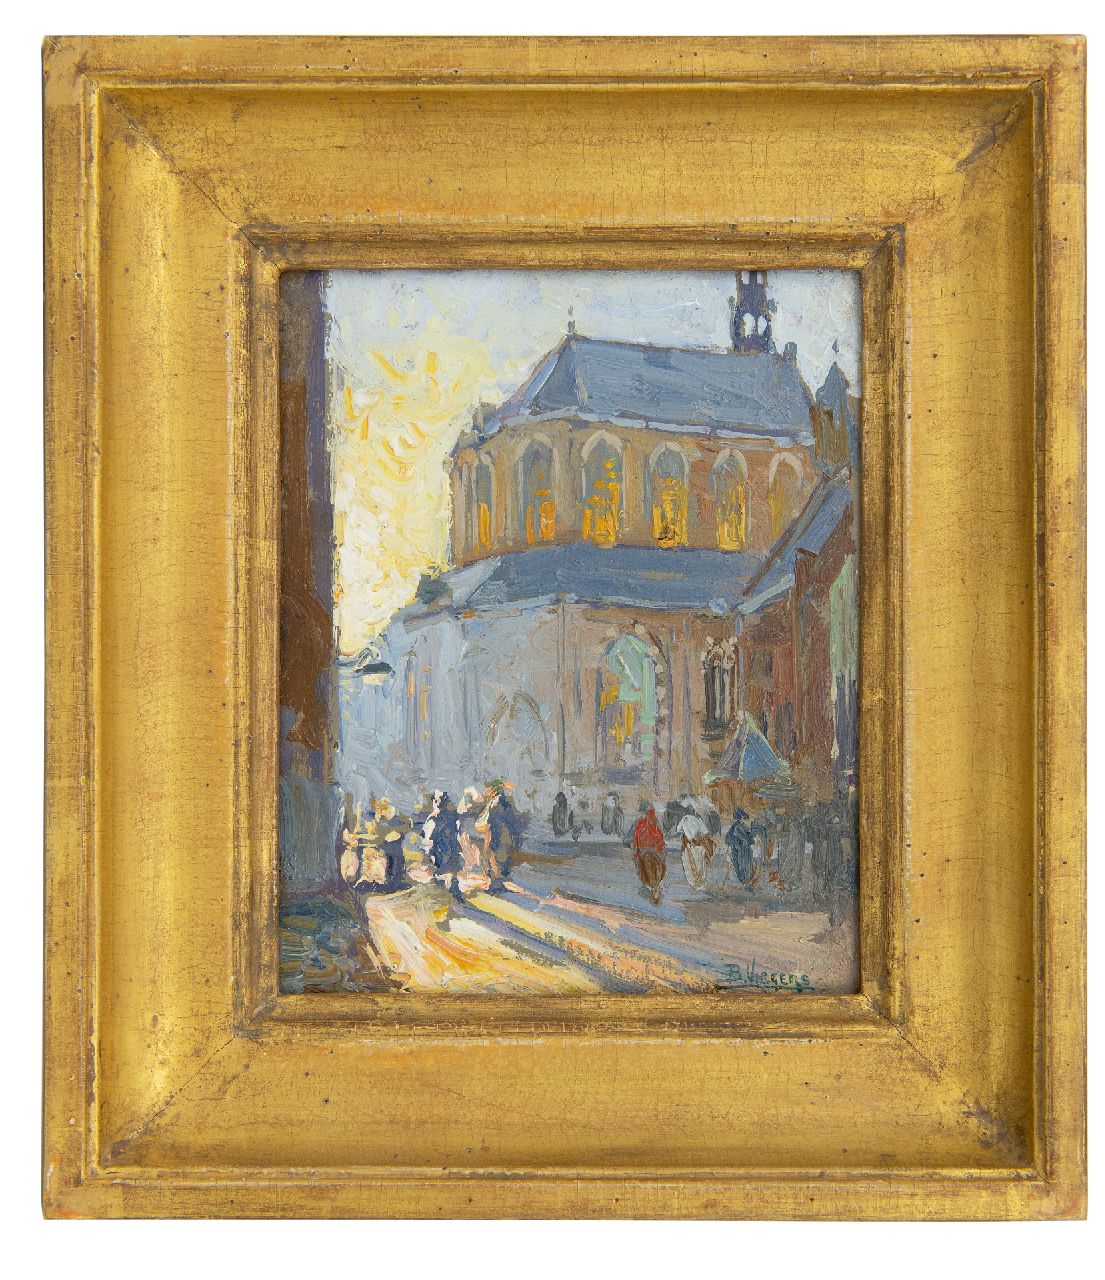 Viegers B.P.  | Bernardus Petrus 'Ben' Viegers | Paintings offered for sale | Behind the Grote Kerk, Den Haag, oil on paper laid down on panel 18.2 x 14.5 cm, signed l.r.